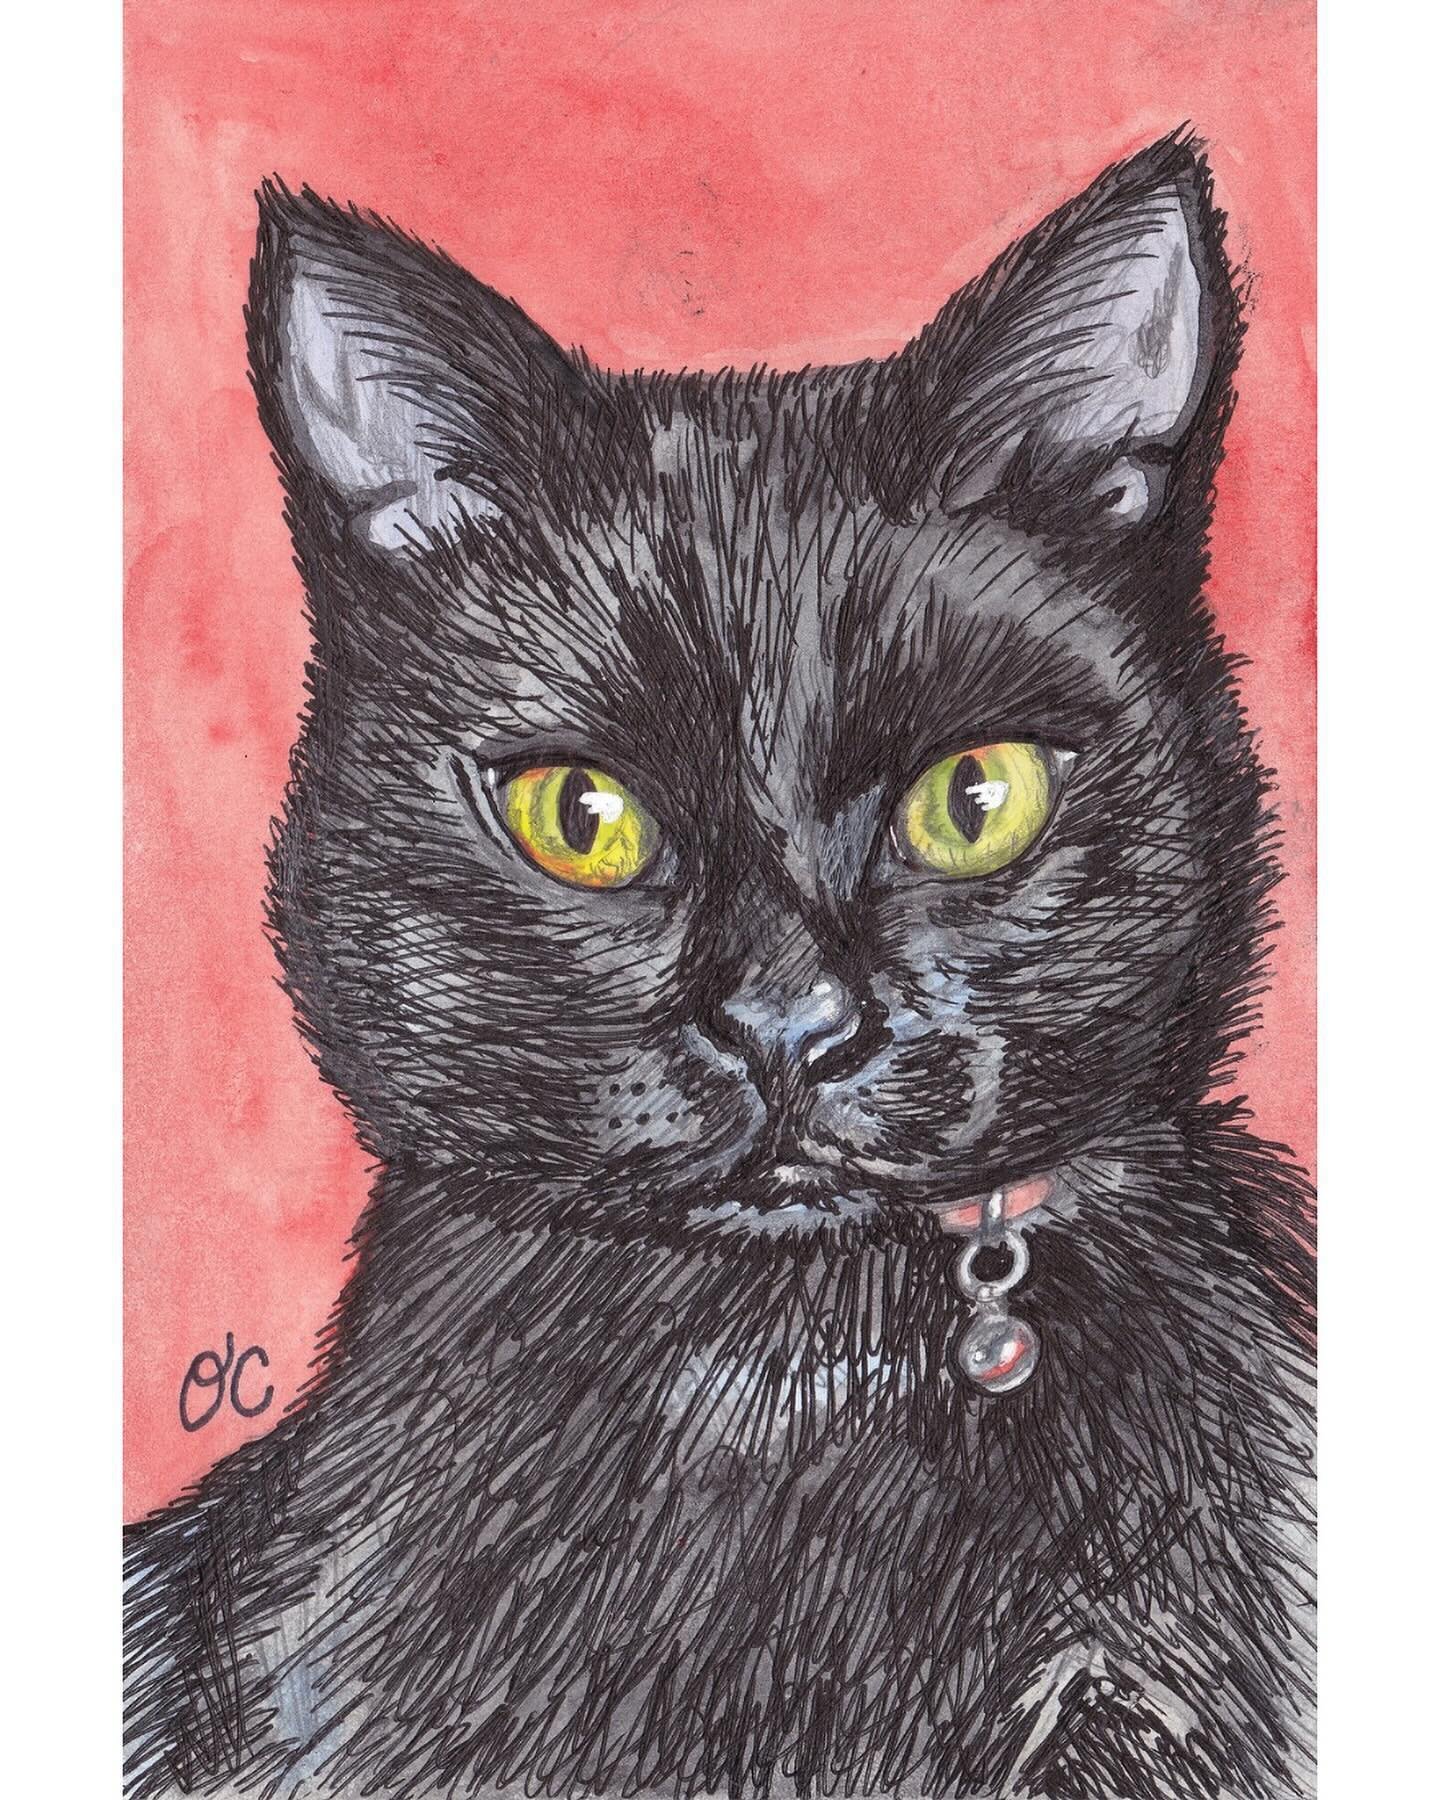 Kitty portrait commission that I just sent out 🐾🖤🧡 #catportrait #petportrait #petcommission #drawingcomission #petdrawing #catdrawing #blackcat #halloweencat